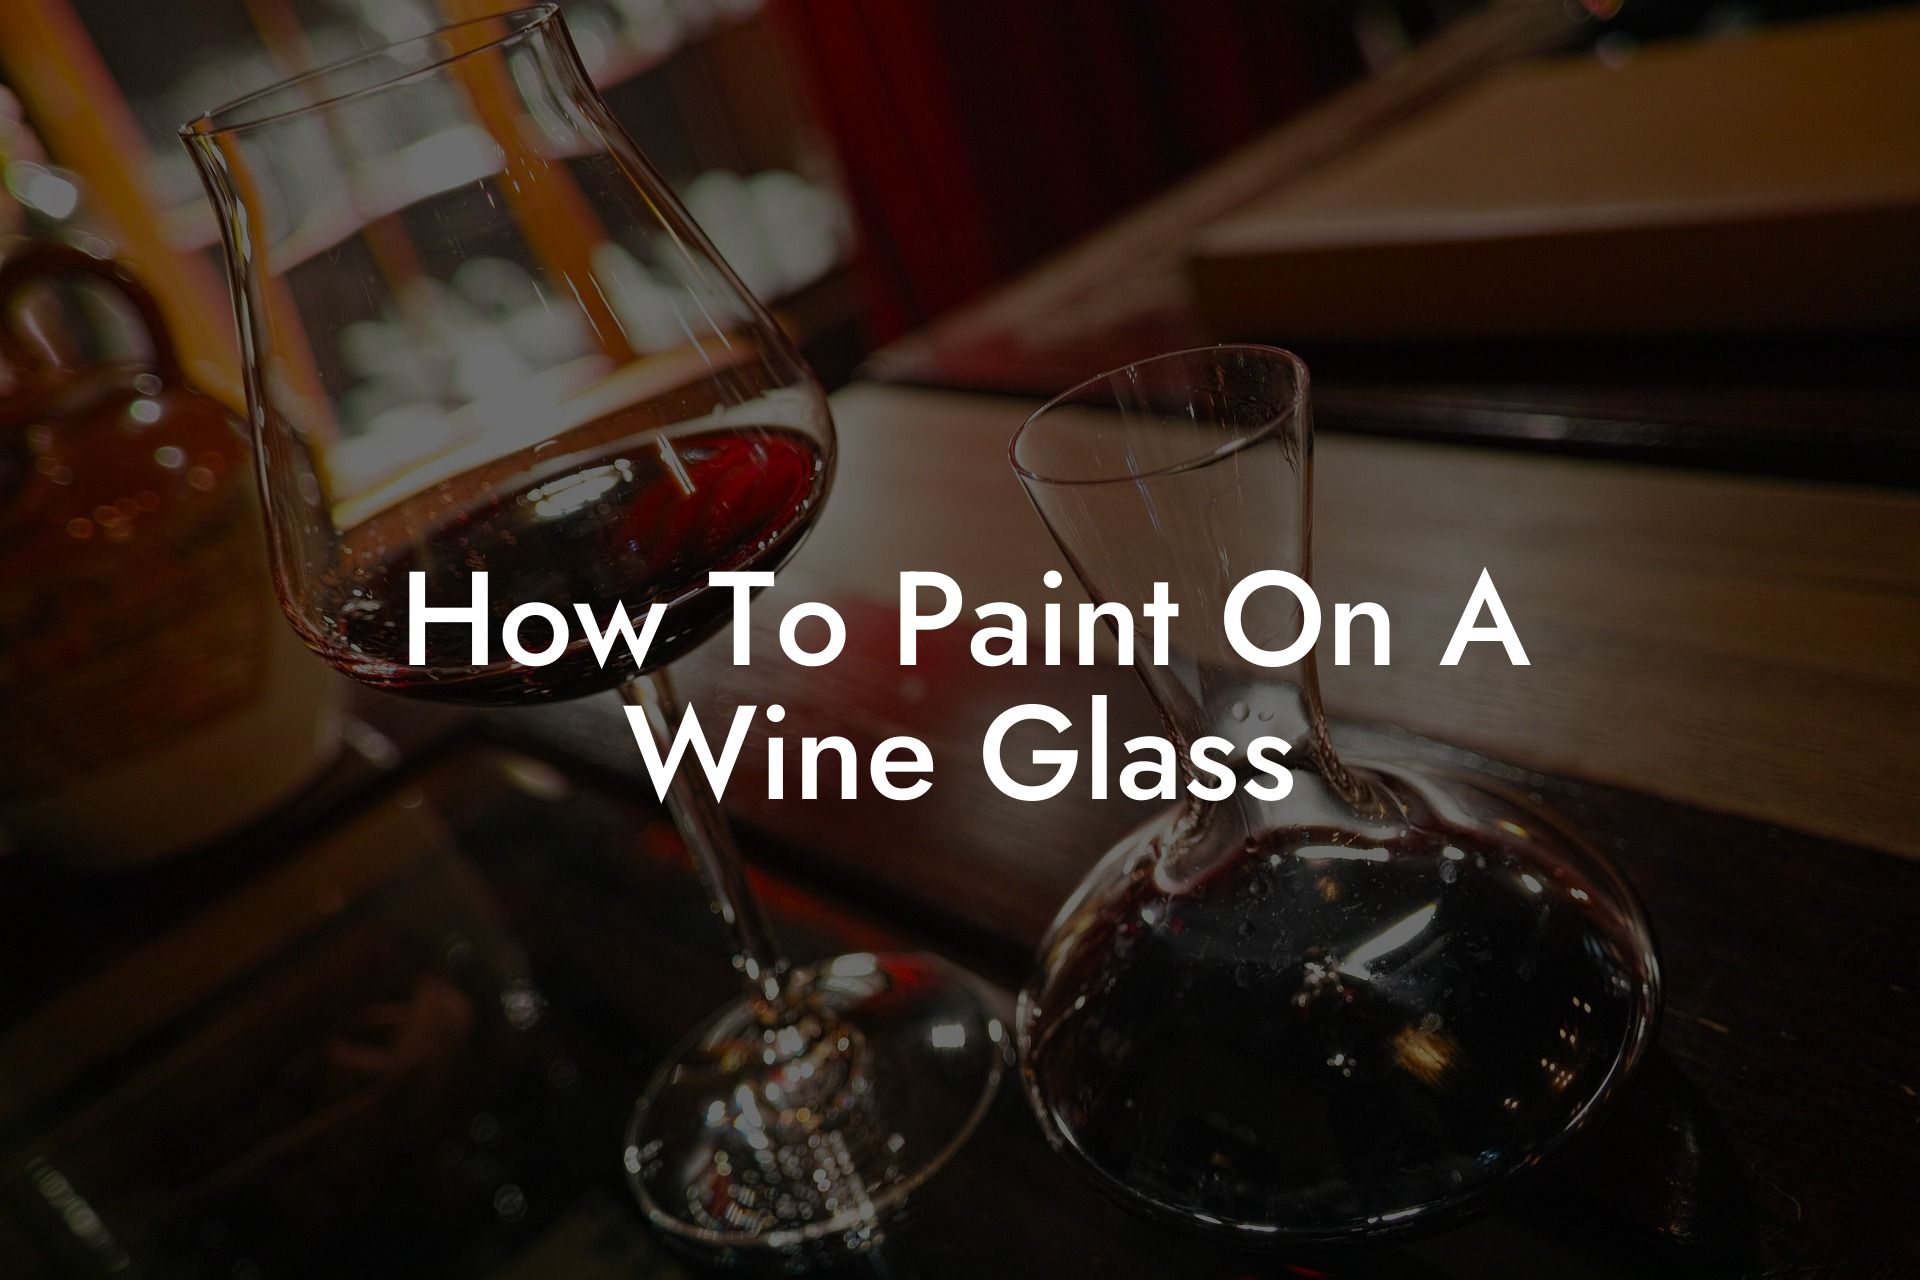 How To Paint On A Wine Glass